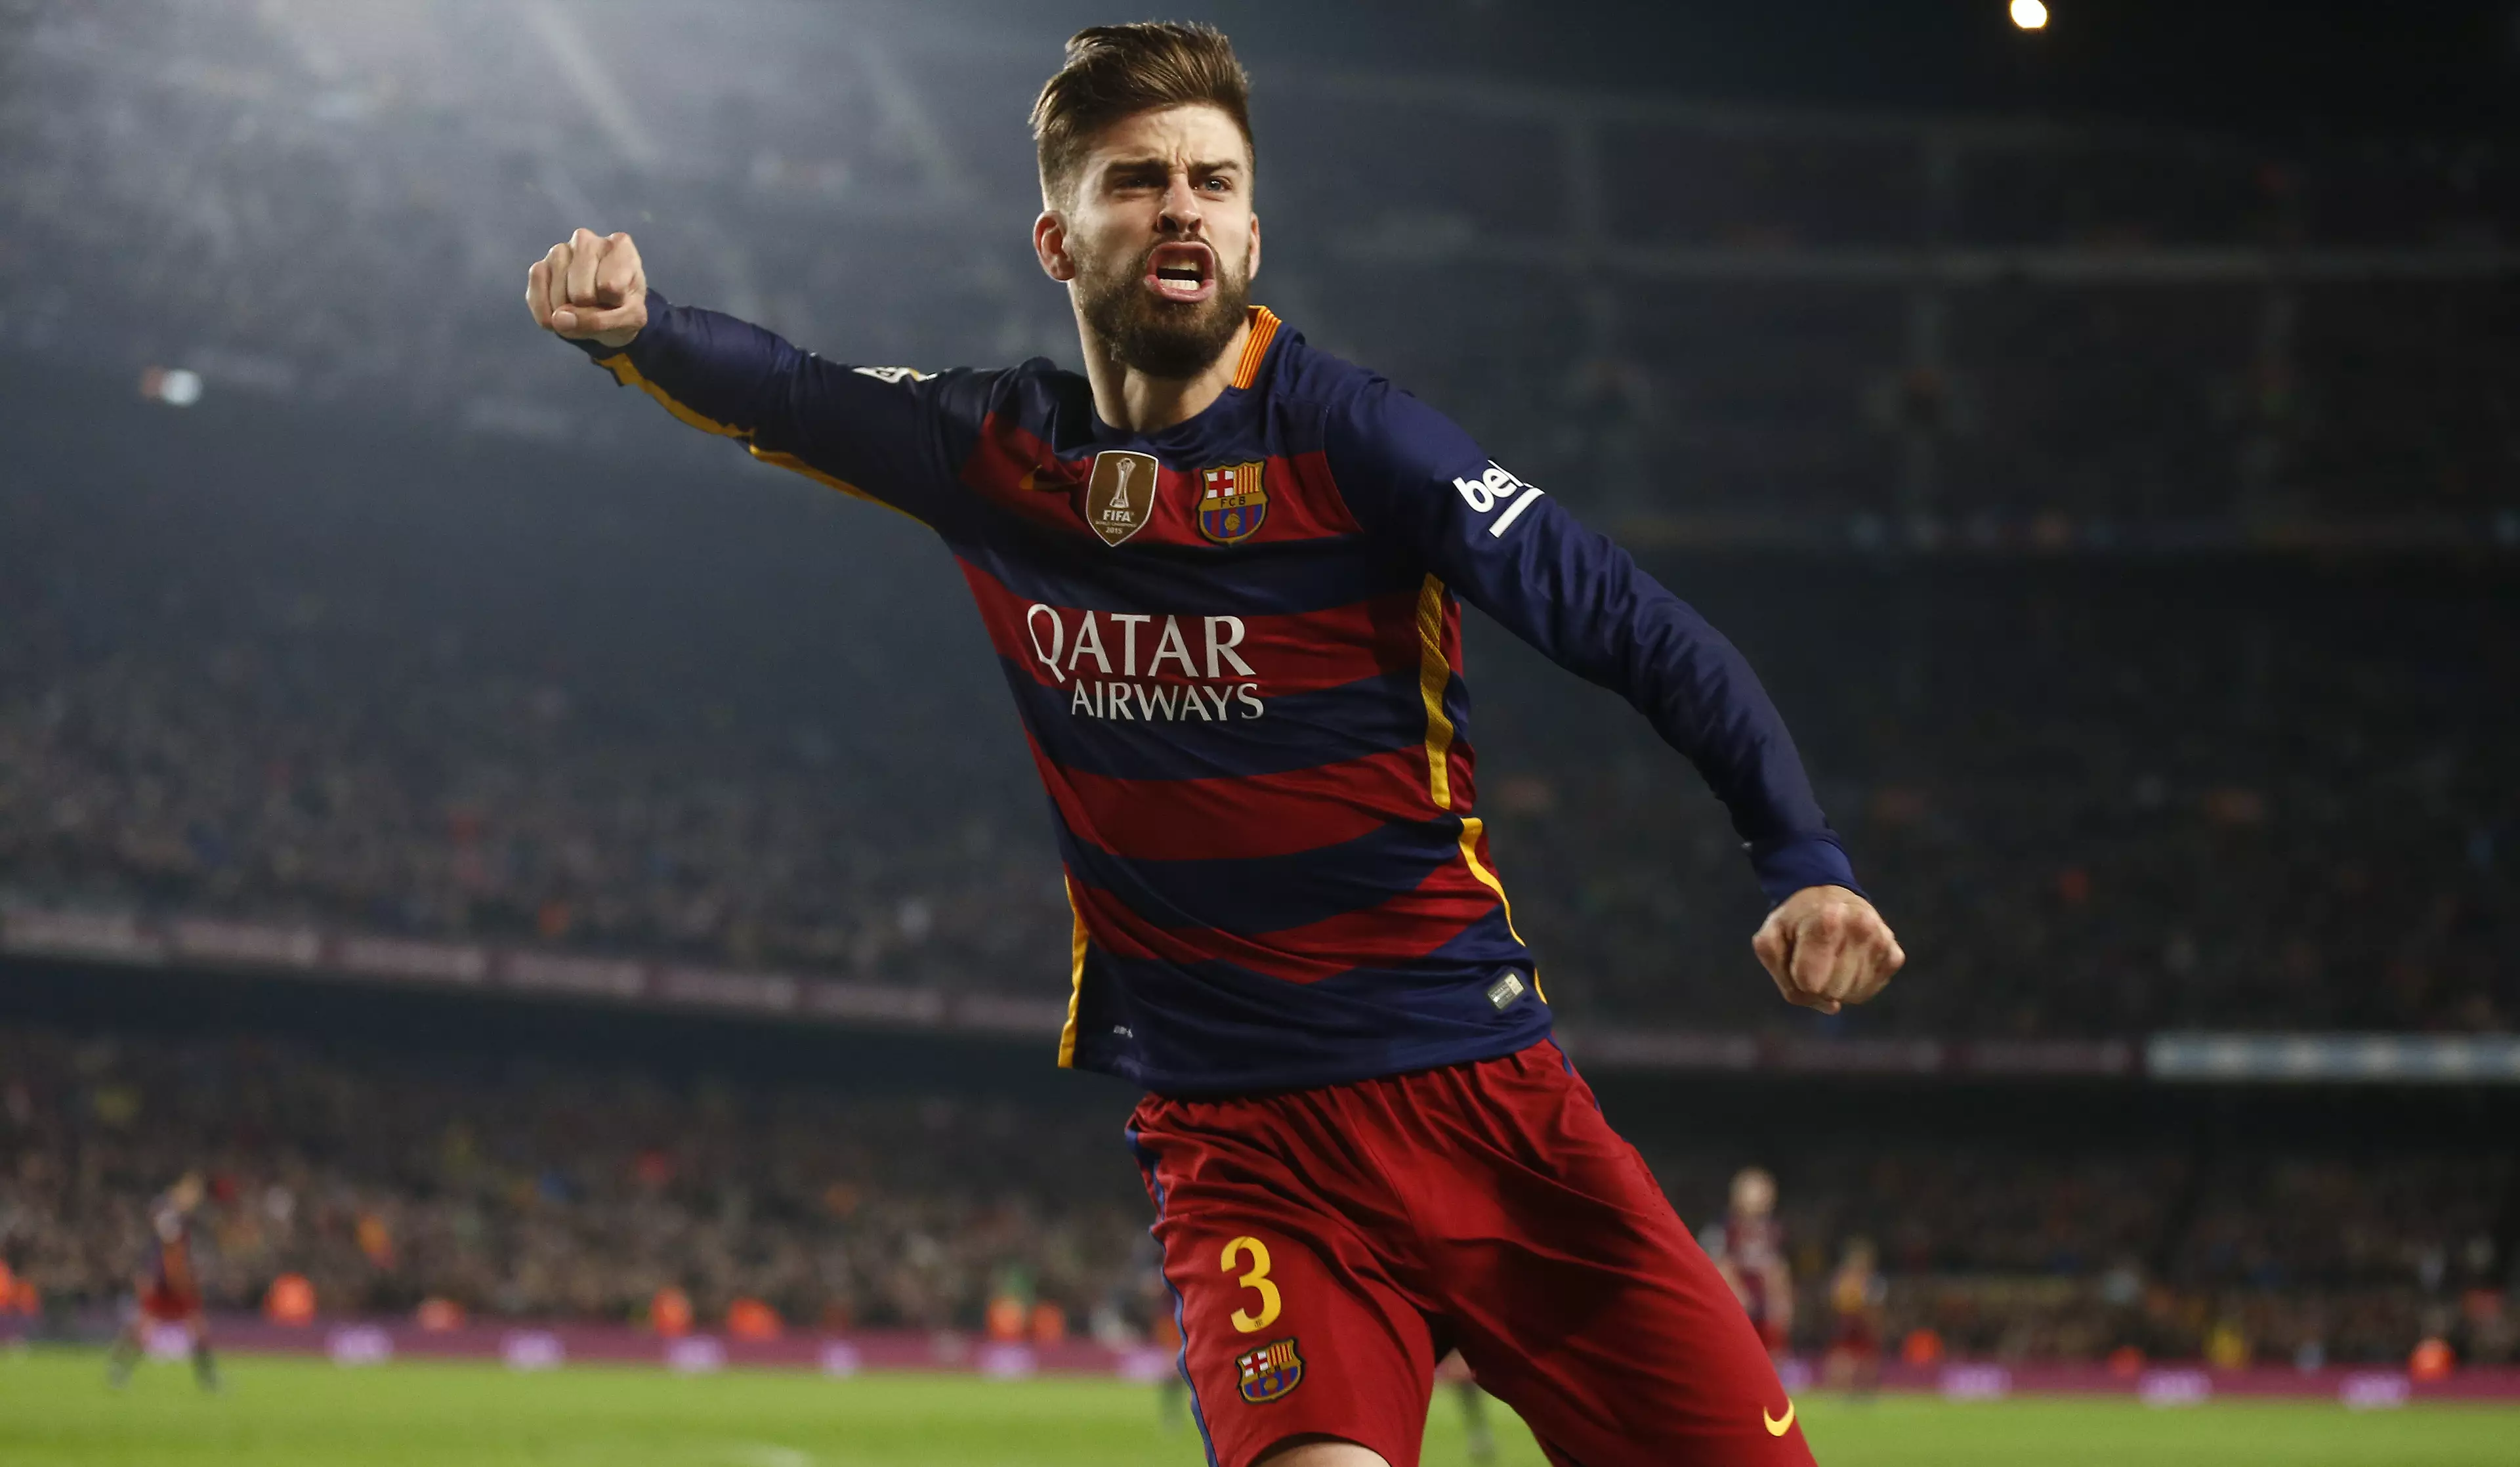 Gerard Pique Gives Some Interesting Answers During Twitter Q&A